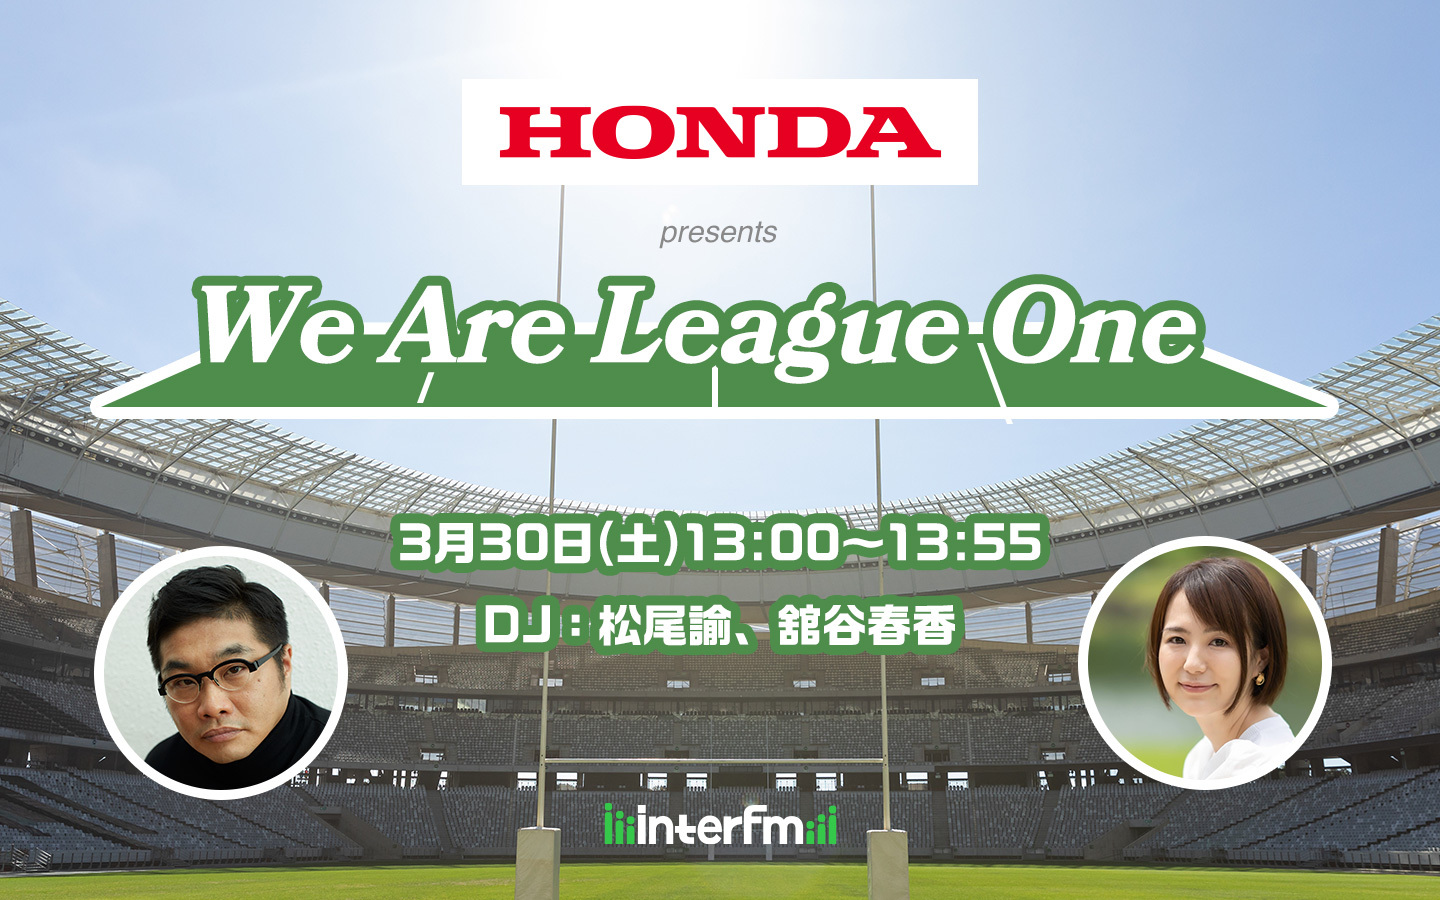 Honda presents We Are League One